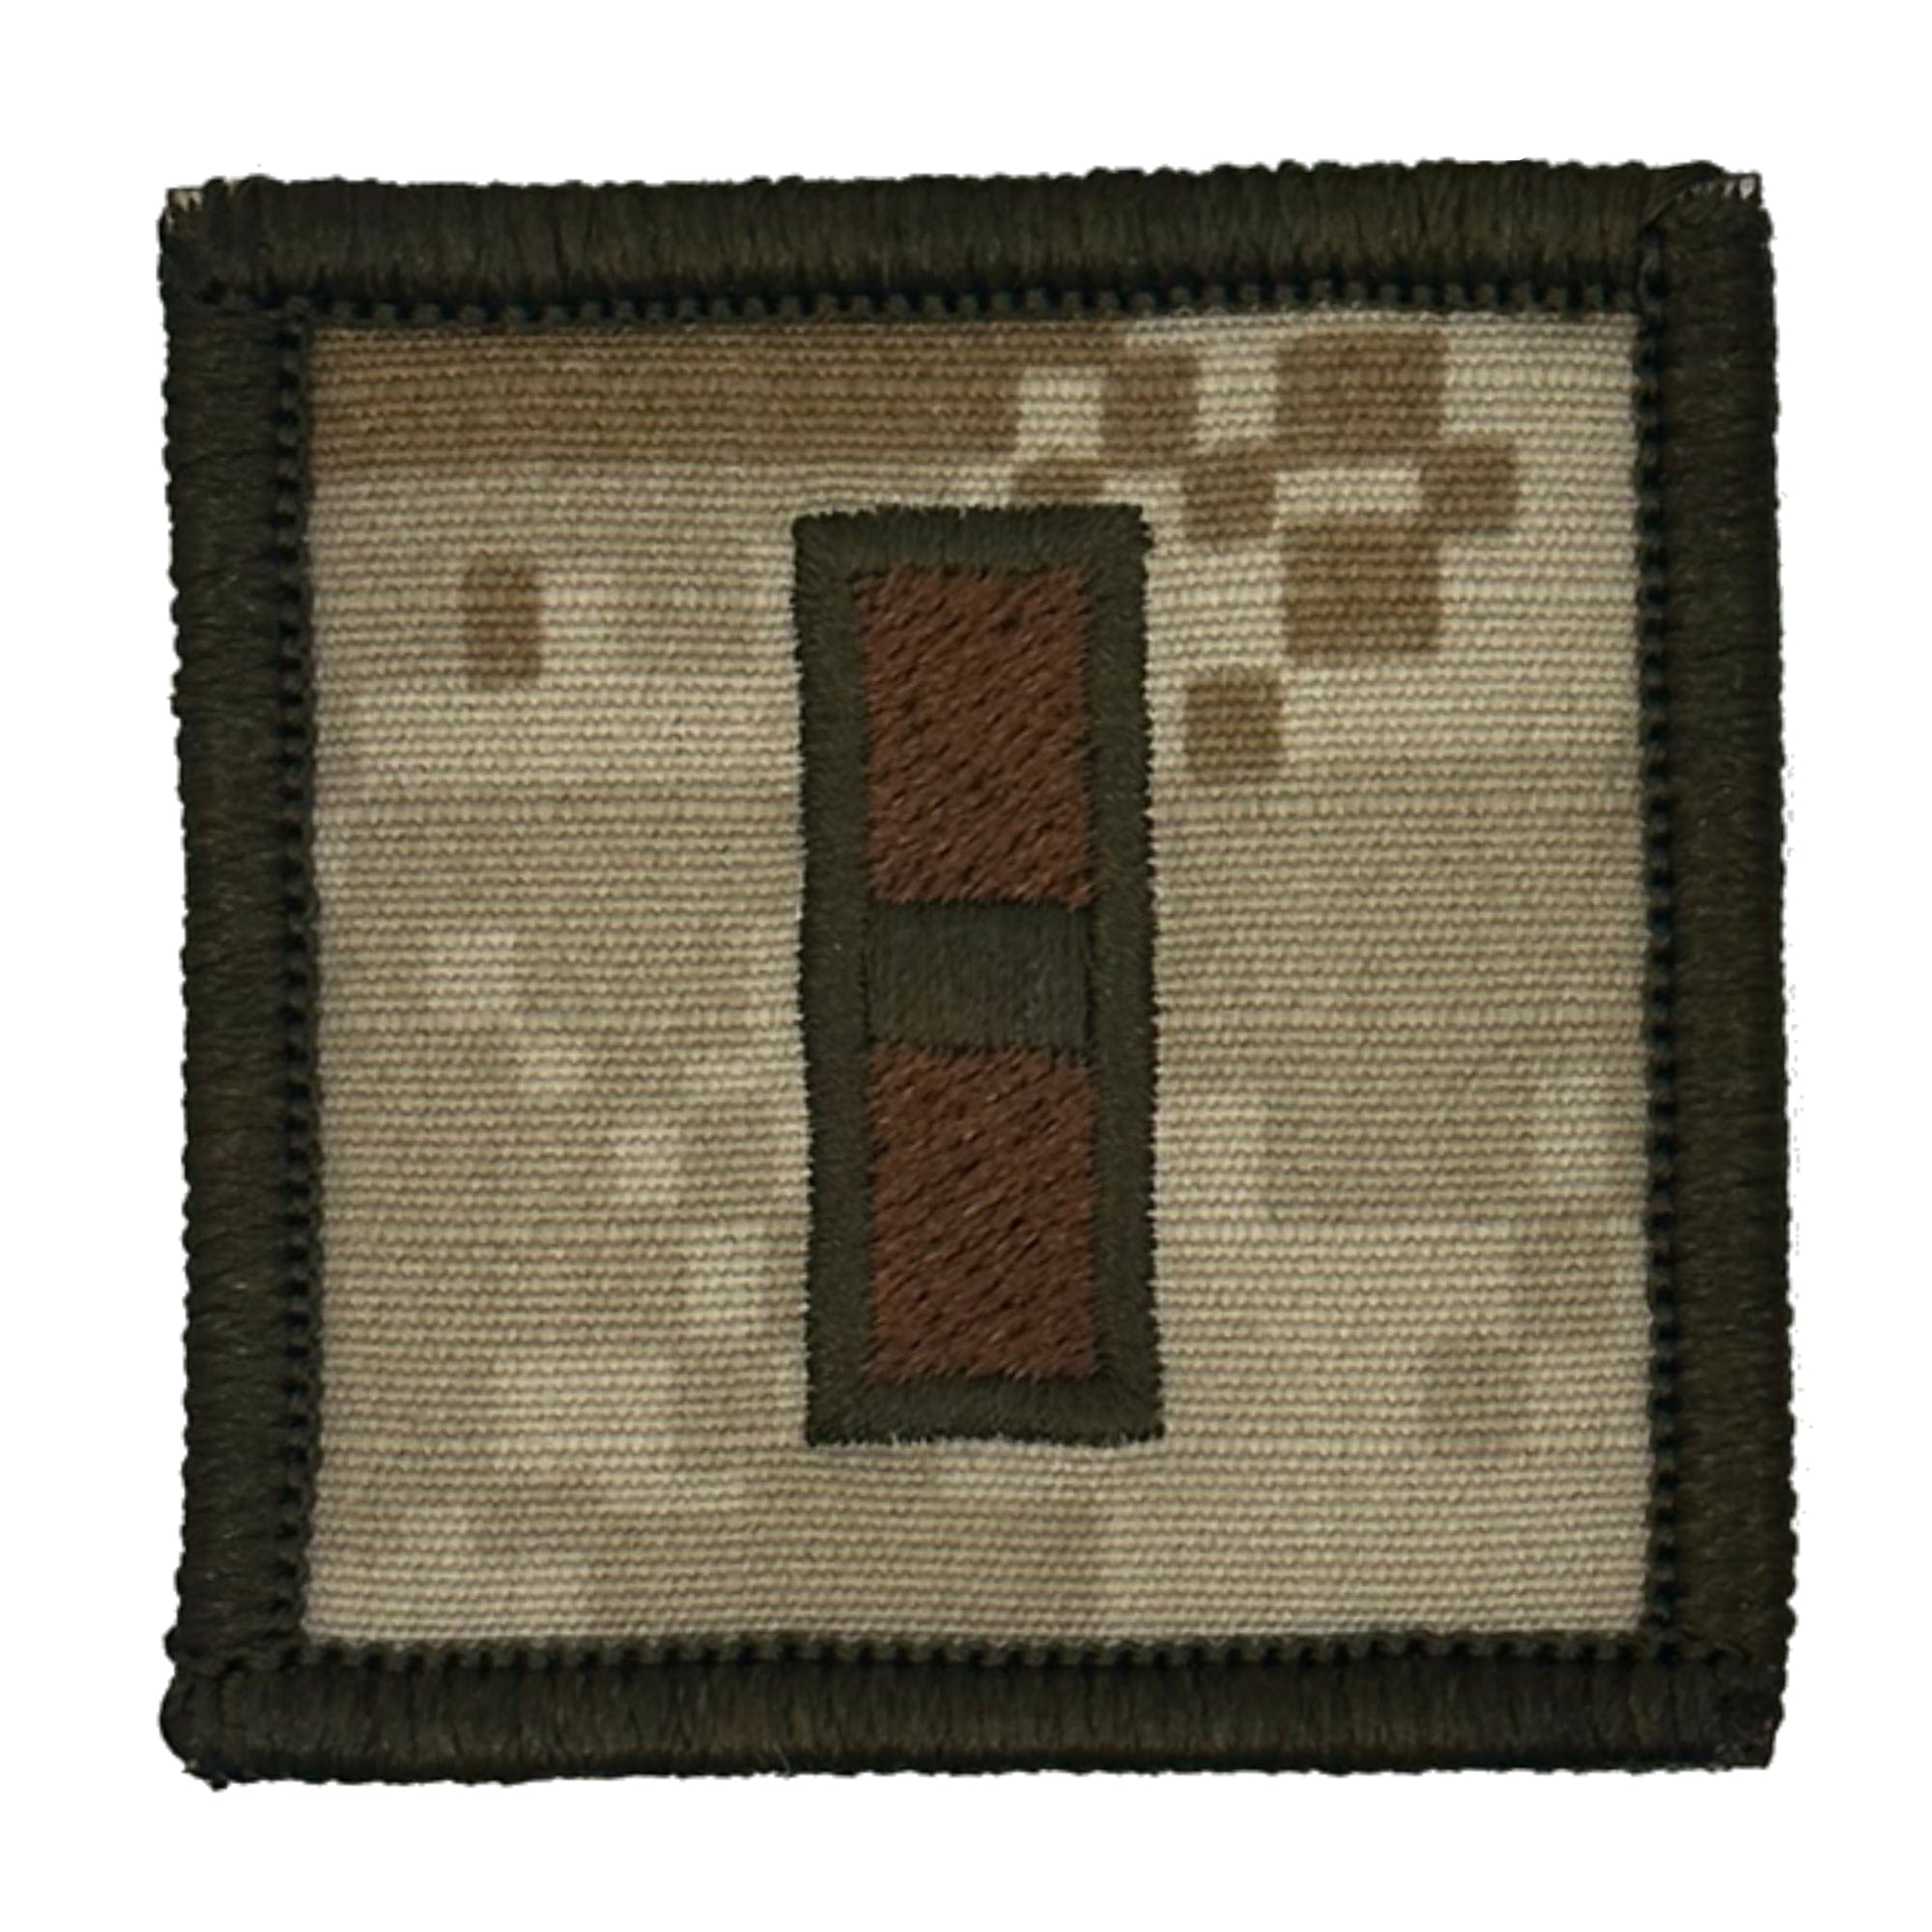 Tactical Gear Junkie Patches MARPAT Desert / Chief Warrant Officer 3 USMC Rank Insignia - 2x2 Patch